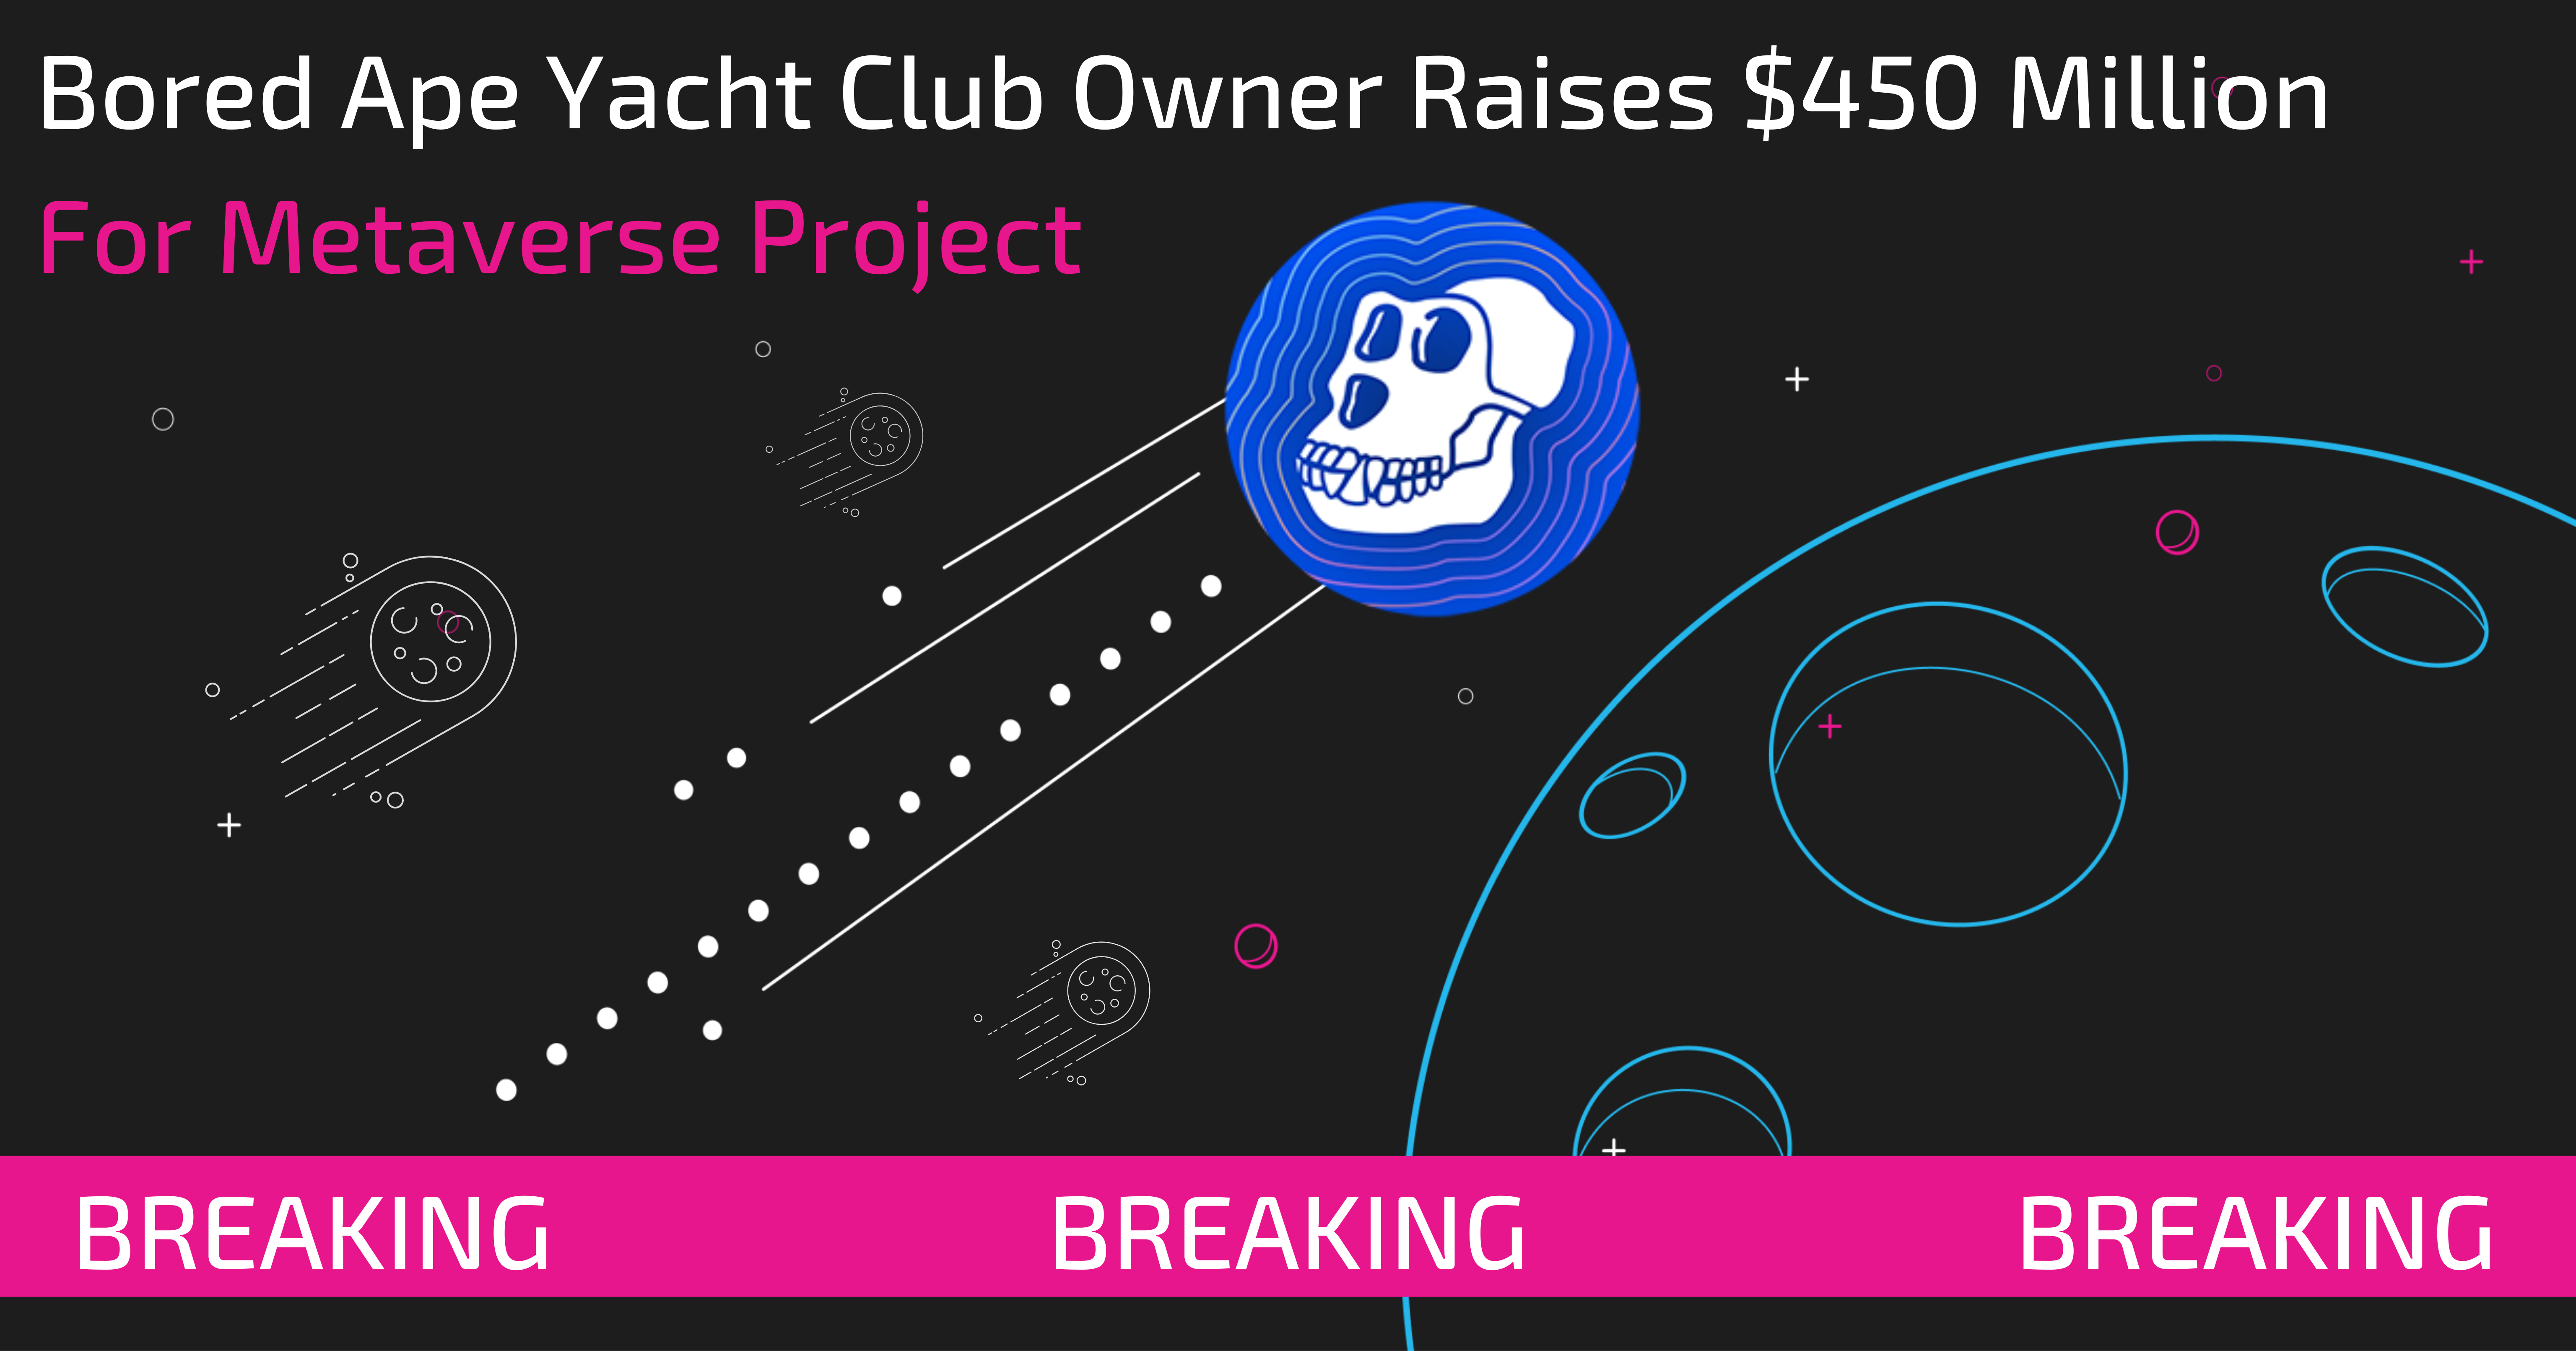 Bored Ape Yacht Club Raises $450m for Metaverse Project